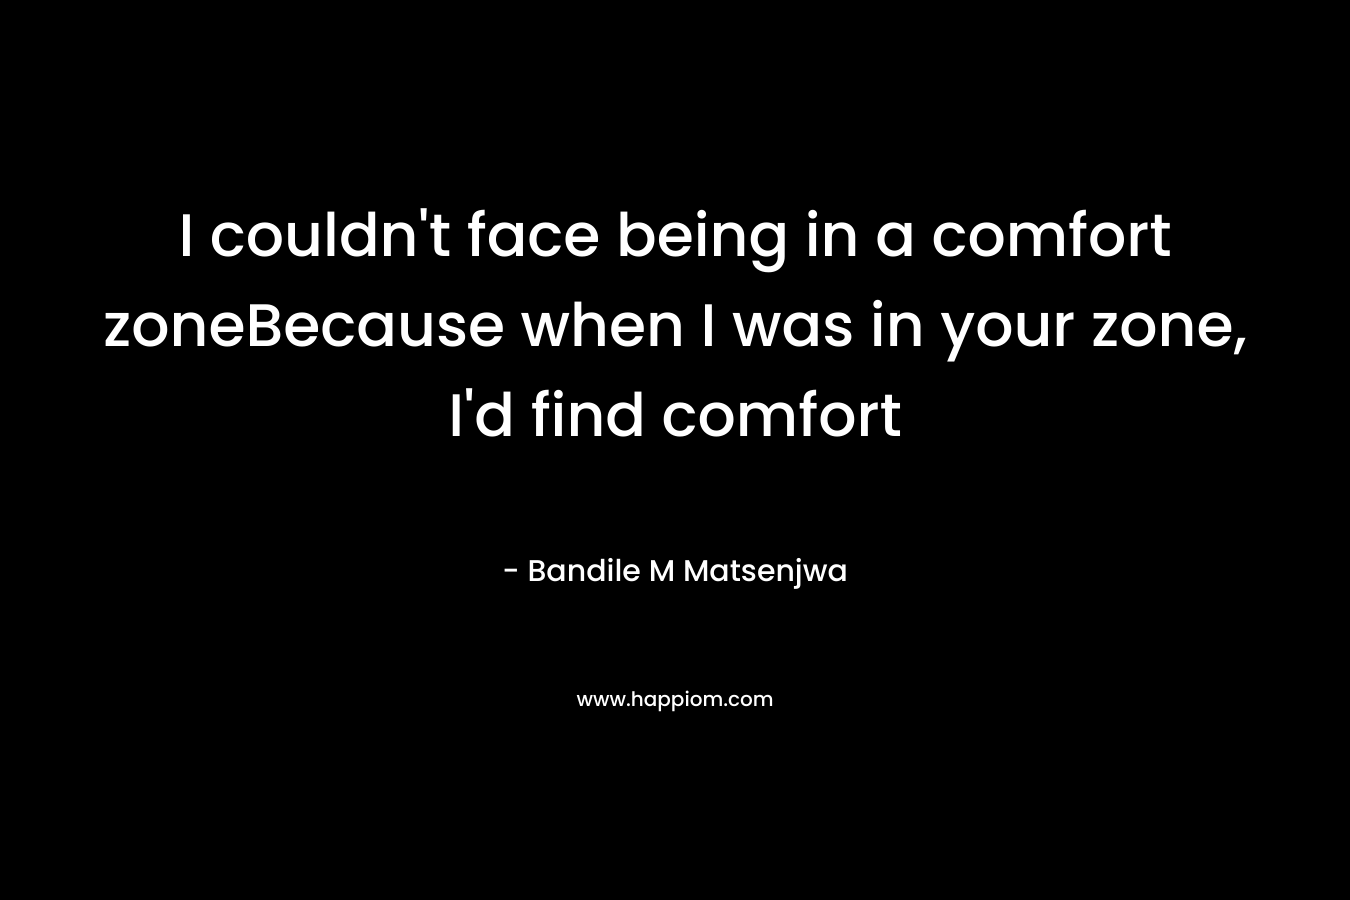 I couldn't face being in a comfort zoneBecause when I was in your zone, I'd find comfort